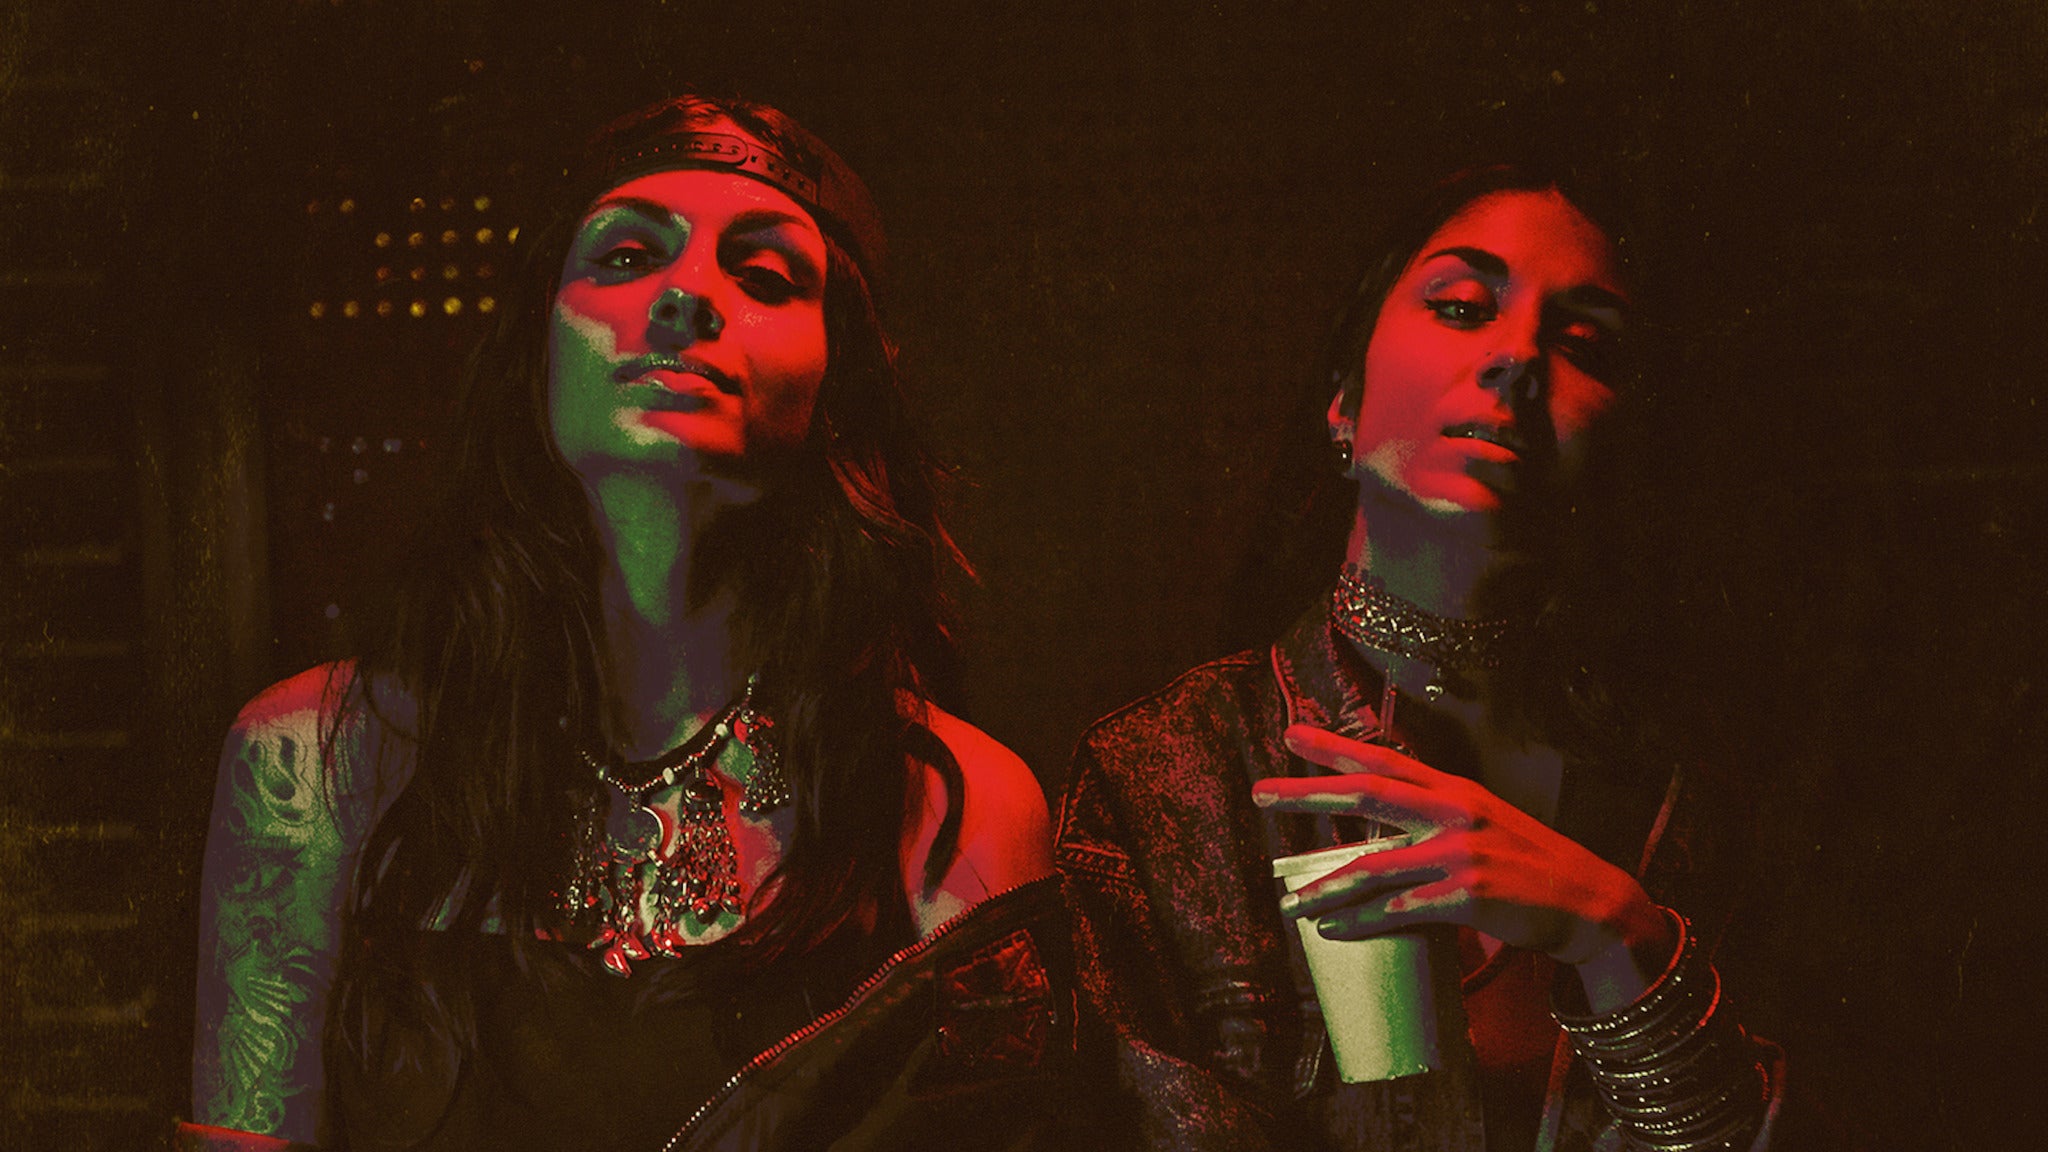 Krewella - New World Tour presented by SiriusXM BPM in St Louis promo photo for Live Nation presale offer code